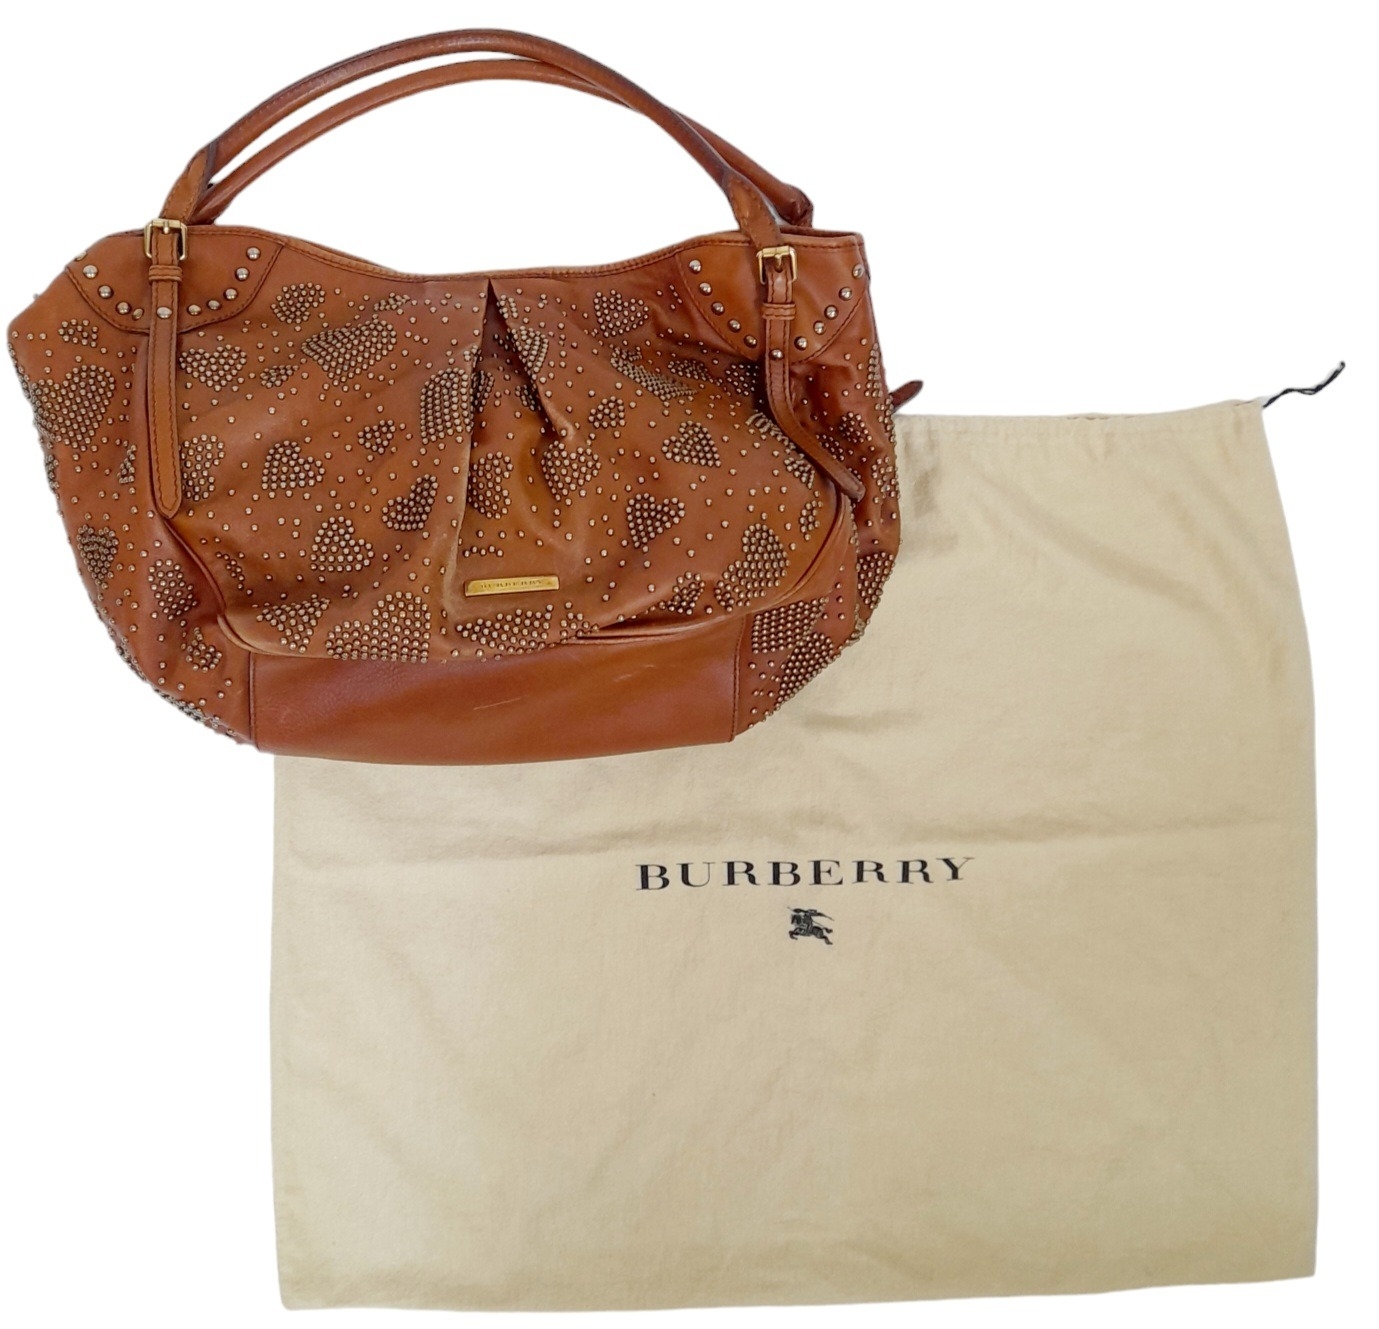 A Burberry Tan Studded Heart Hobo Bag. Leather exterior with stud embellishments, golden-toned - Image 8 of 8